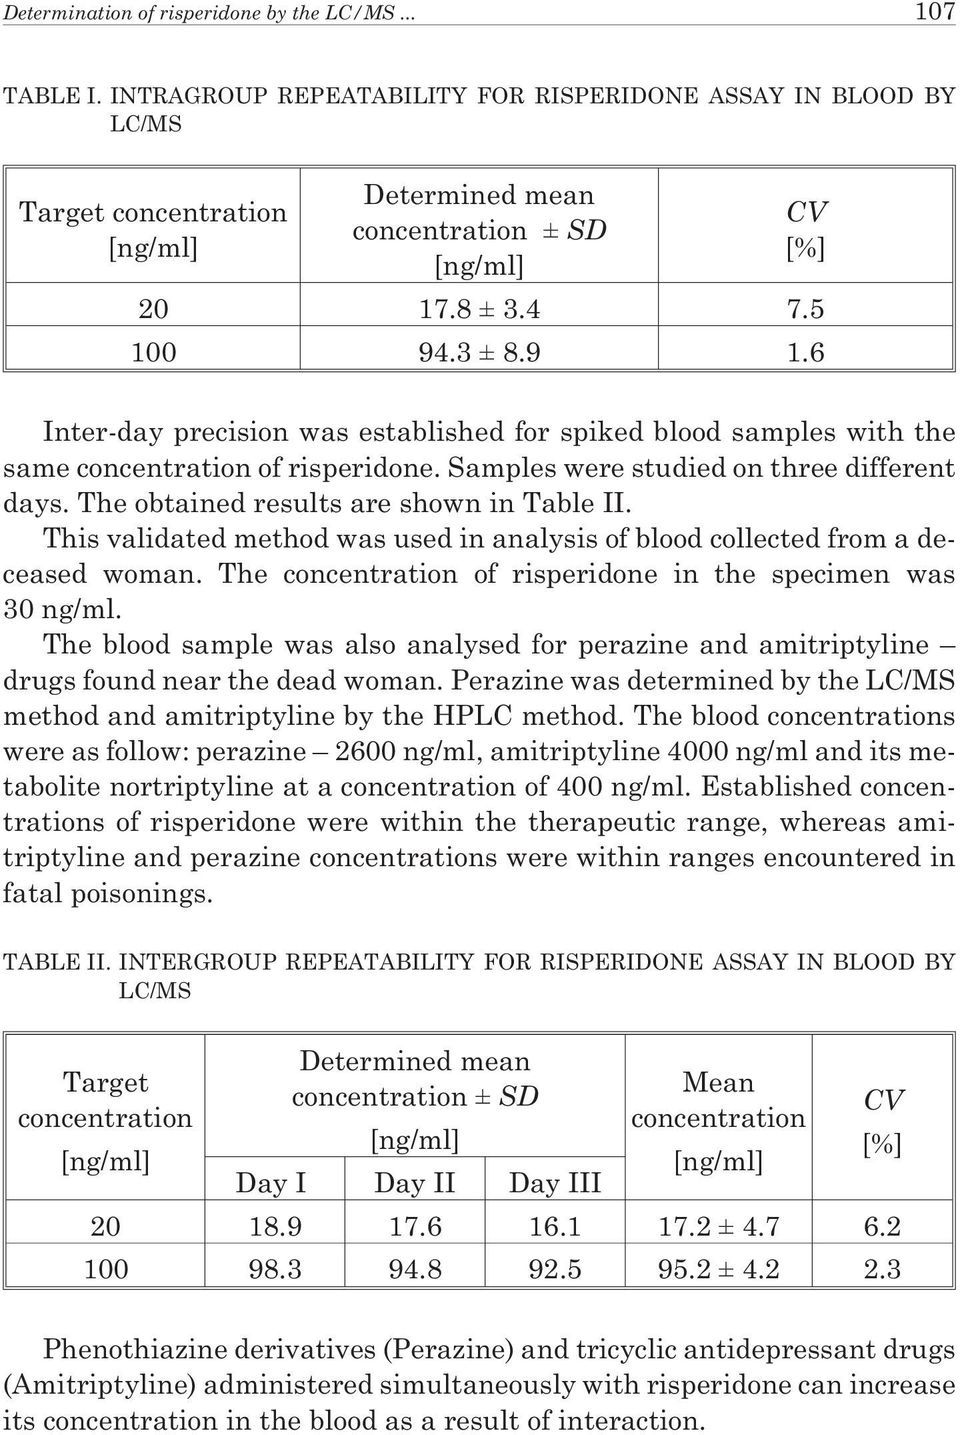 The obtained results are shown in Table II. This validated method was used in analysis of blood collected from a deceased woman. The concentration of risperidone in the specimen was 30 ng/ml.